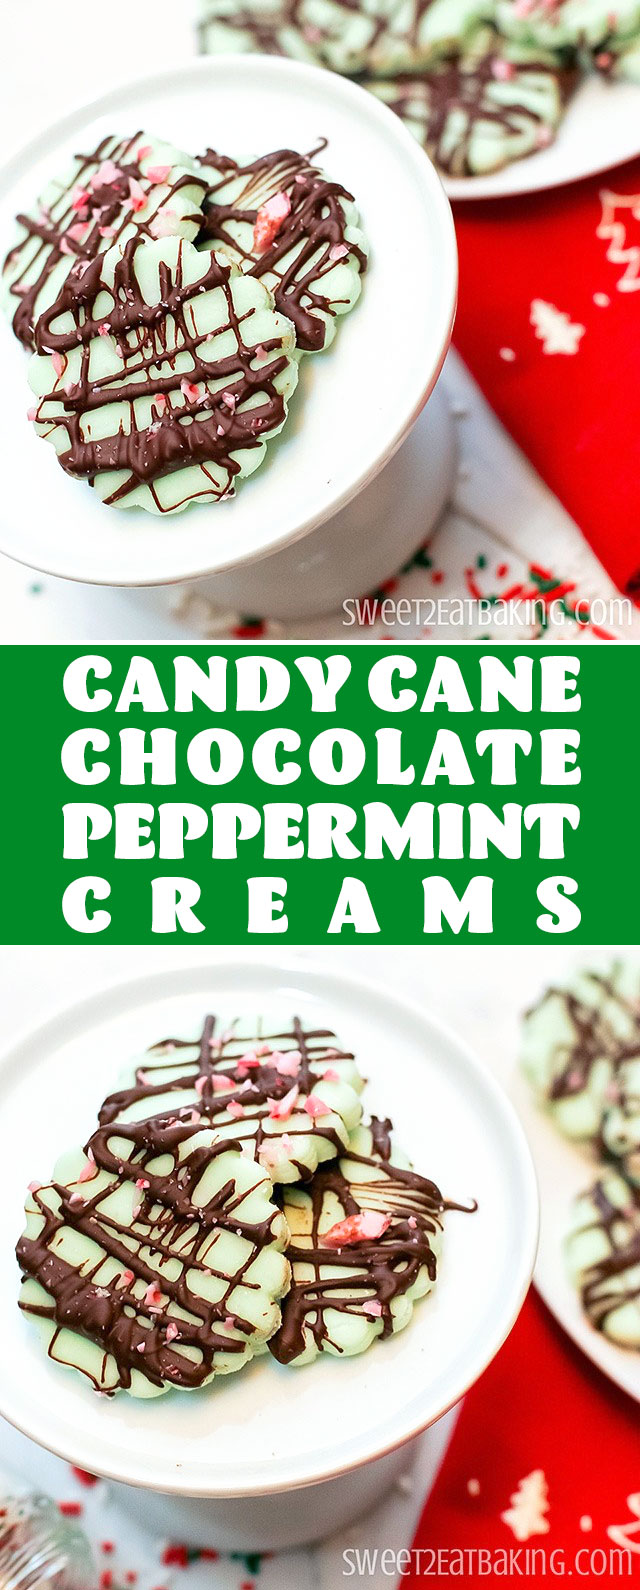 Candy Cane Chocolate Peppermint Creams Recipe by Sweet2EatBaking.com | These Candy Cane Chocolate Peppermint Creams are egg free, and have crushed candy canes for decoration and inside the creams too. Smothered with dark chocolate too, these Peppermint Creams make an ideal gift at Christmas